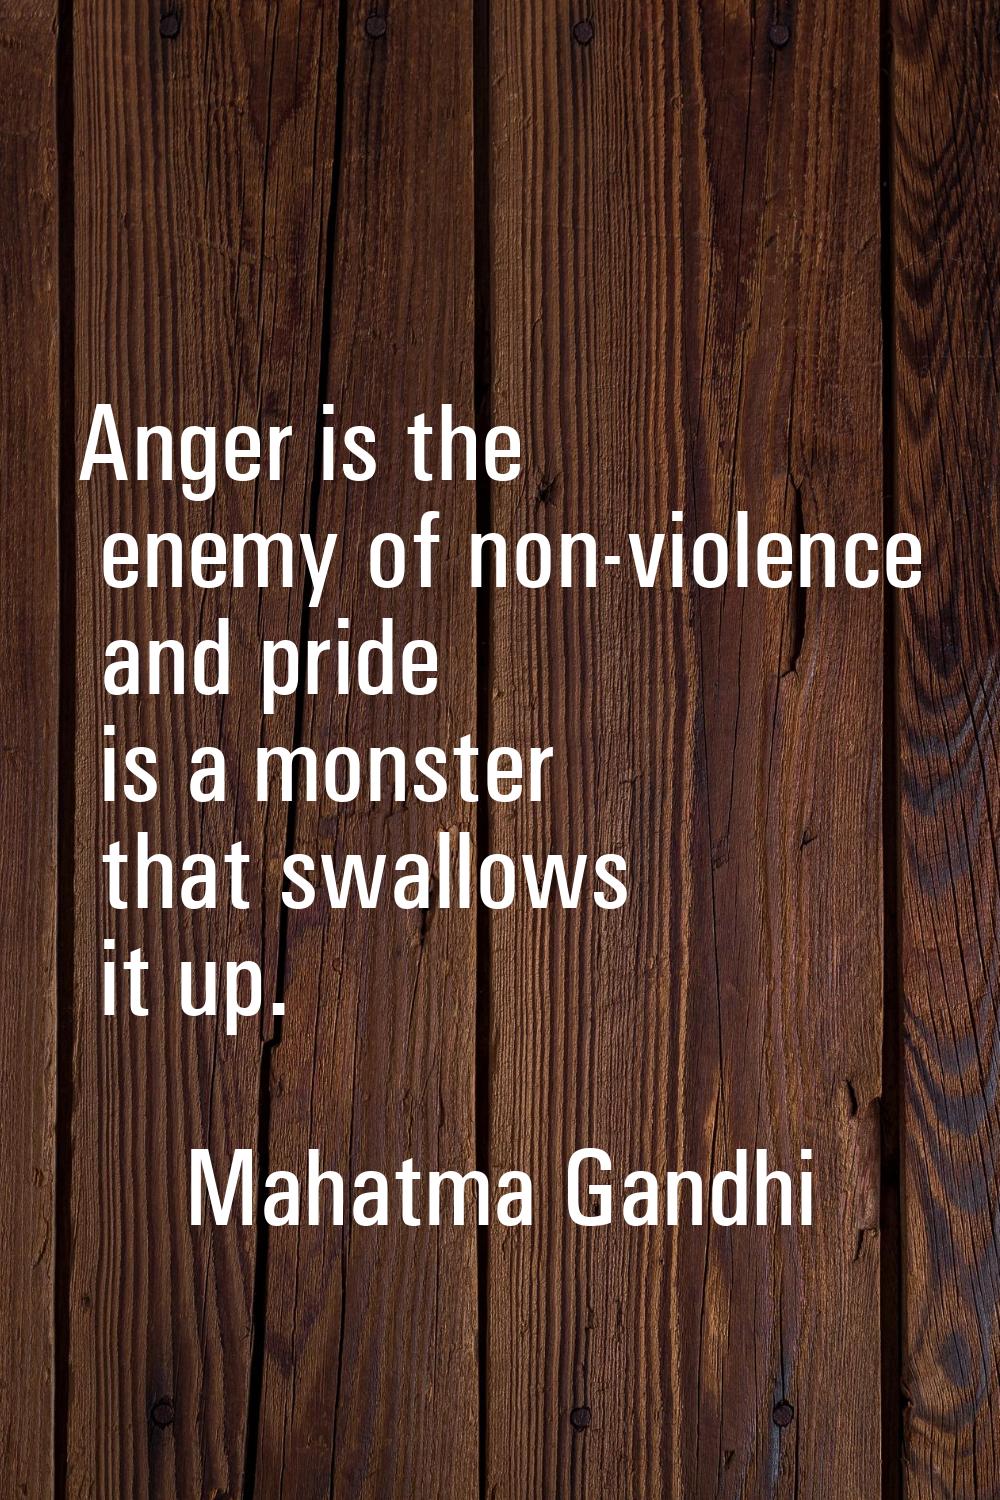 Anger is the enemy of non-violence and pride is a monster that swallows it up.